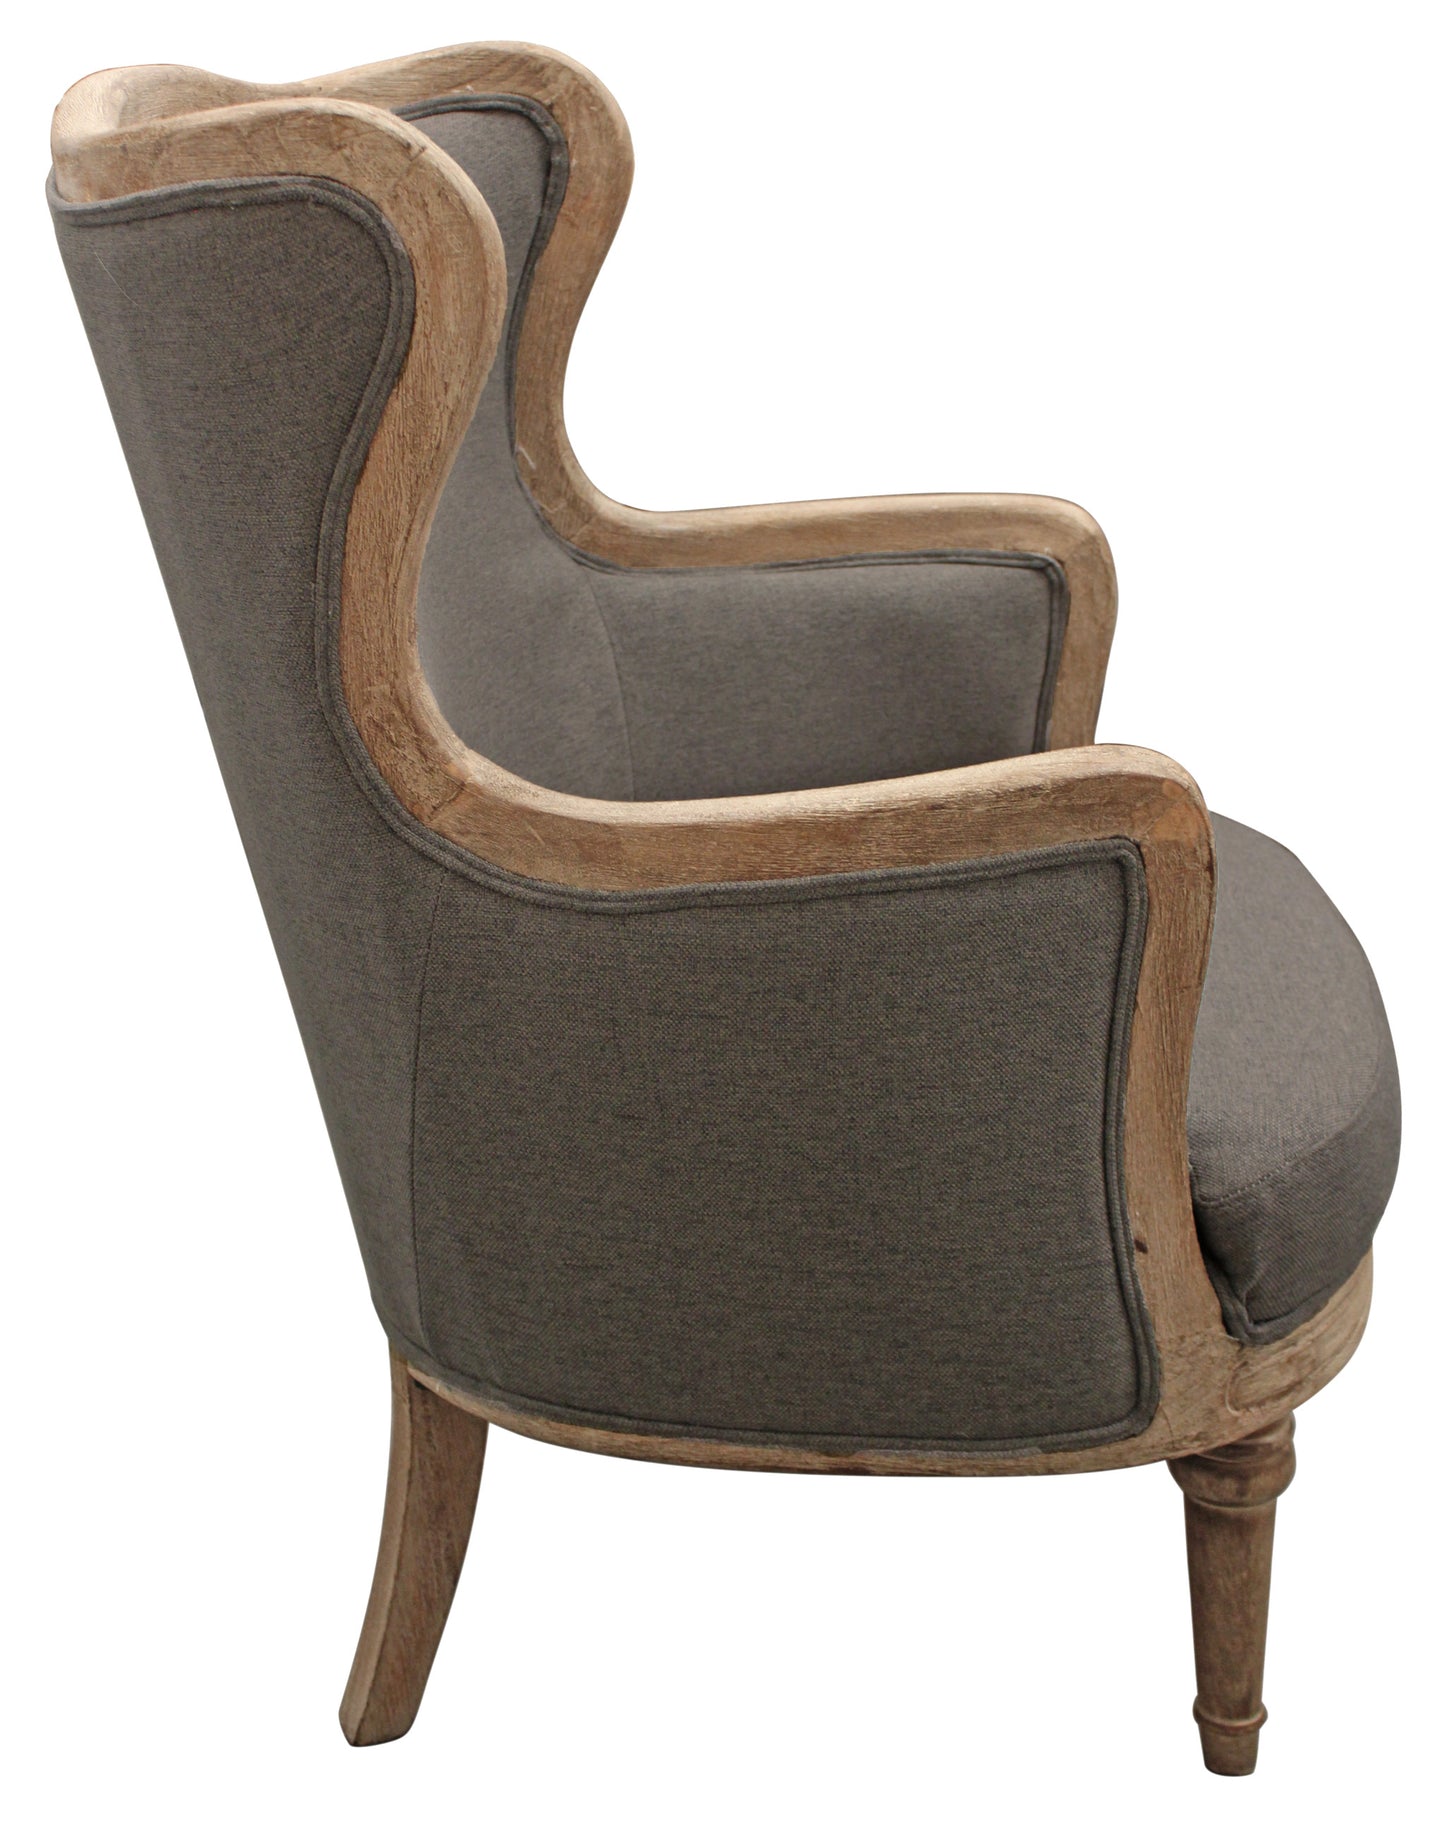 26" Gray Linen And Natural Solid Color Arm Chair